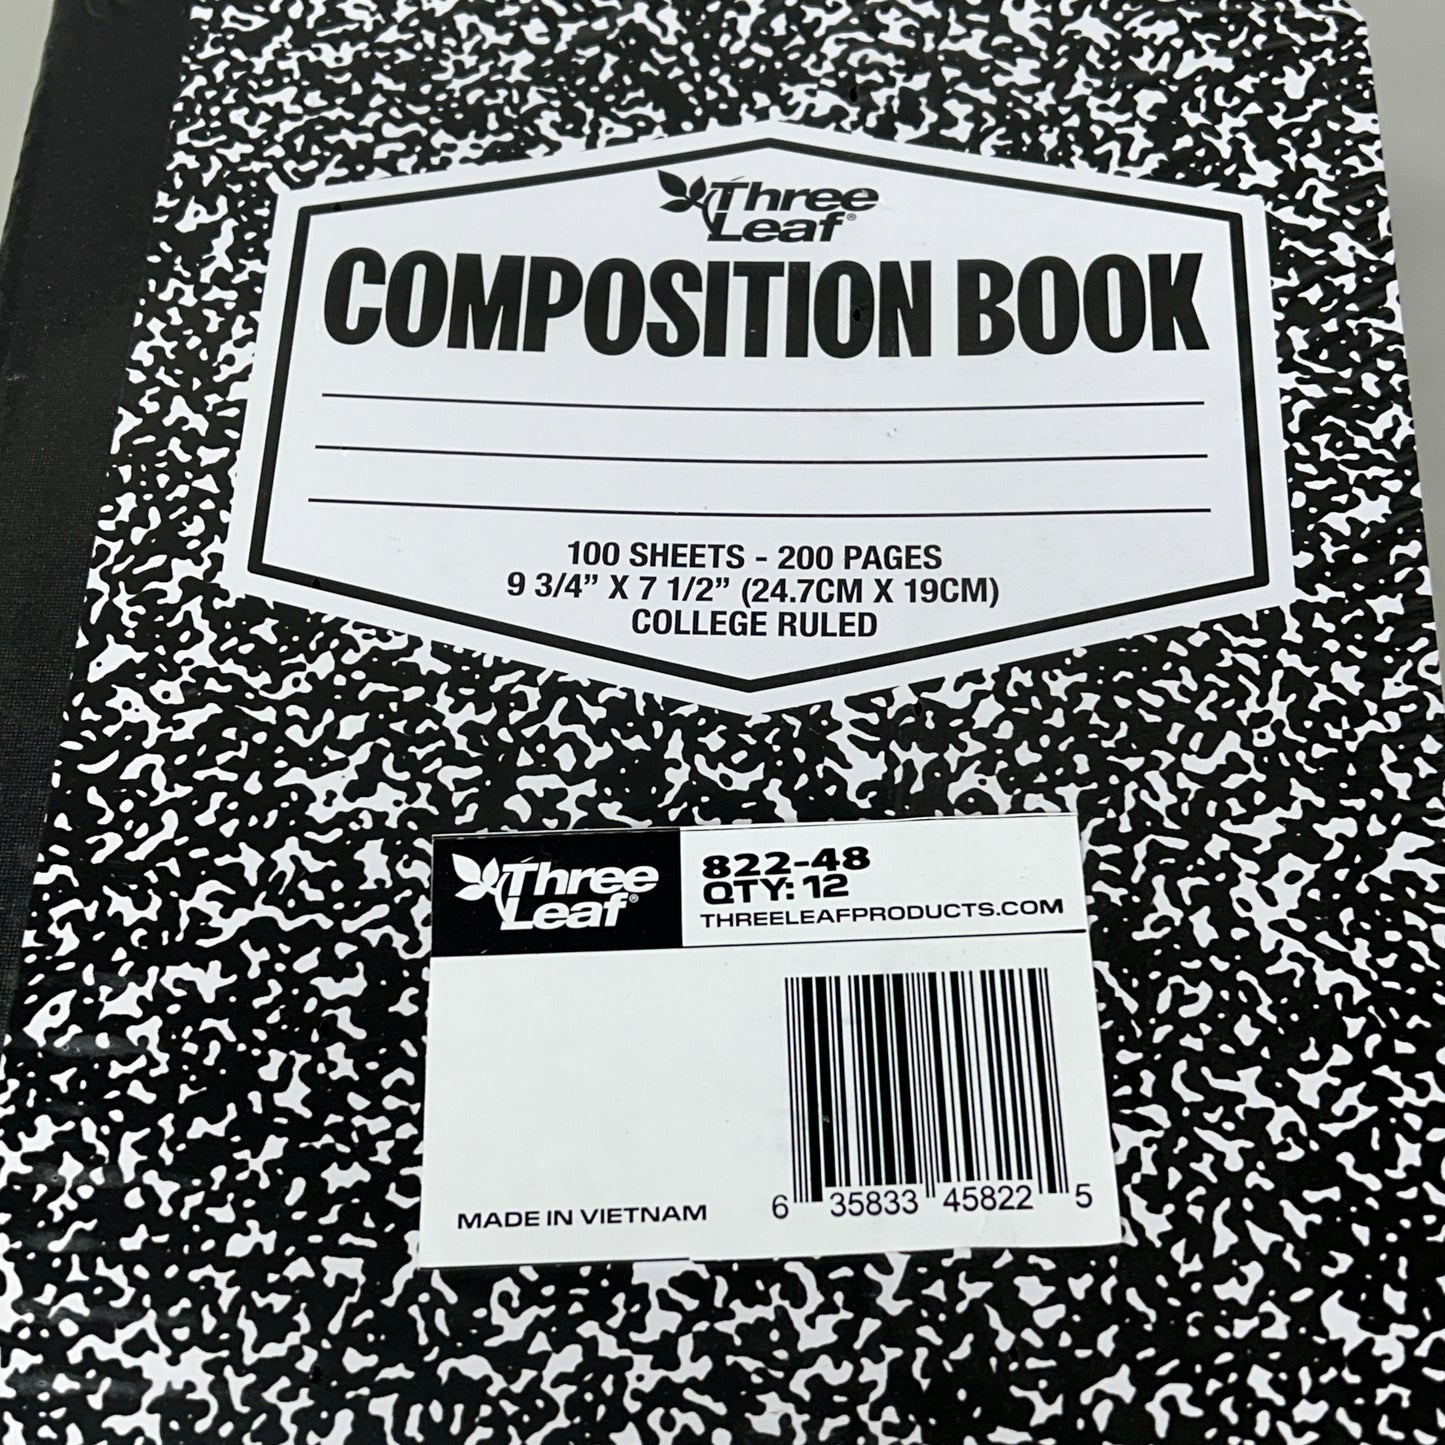 THREE LEAF 48-PK! Composition Book College Ruled 100 Sheets 9-3/4" x 7-1/2" (New)